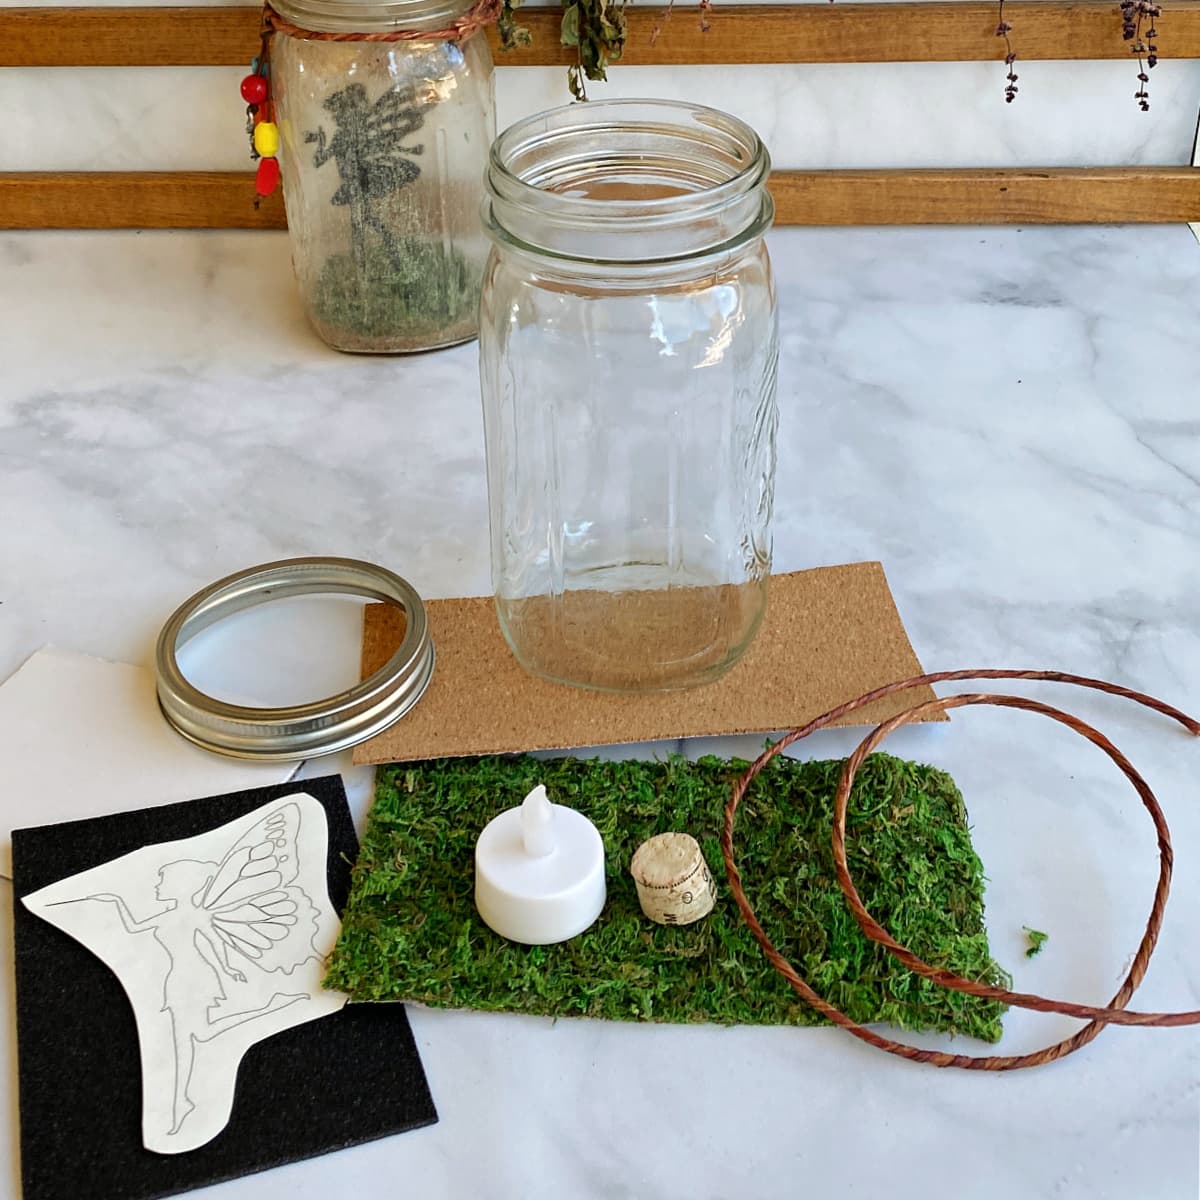 Basic materials needed for fairy jars: Mason jar and ring, fairy printout on adhesive paper, wire for bale, mini battery-powered candle, small piece of cork, black foan sheet, craft moss sheet, adhesive cork sheet.